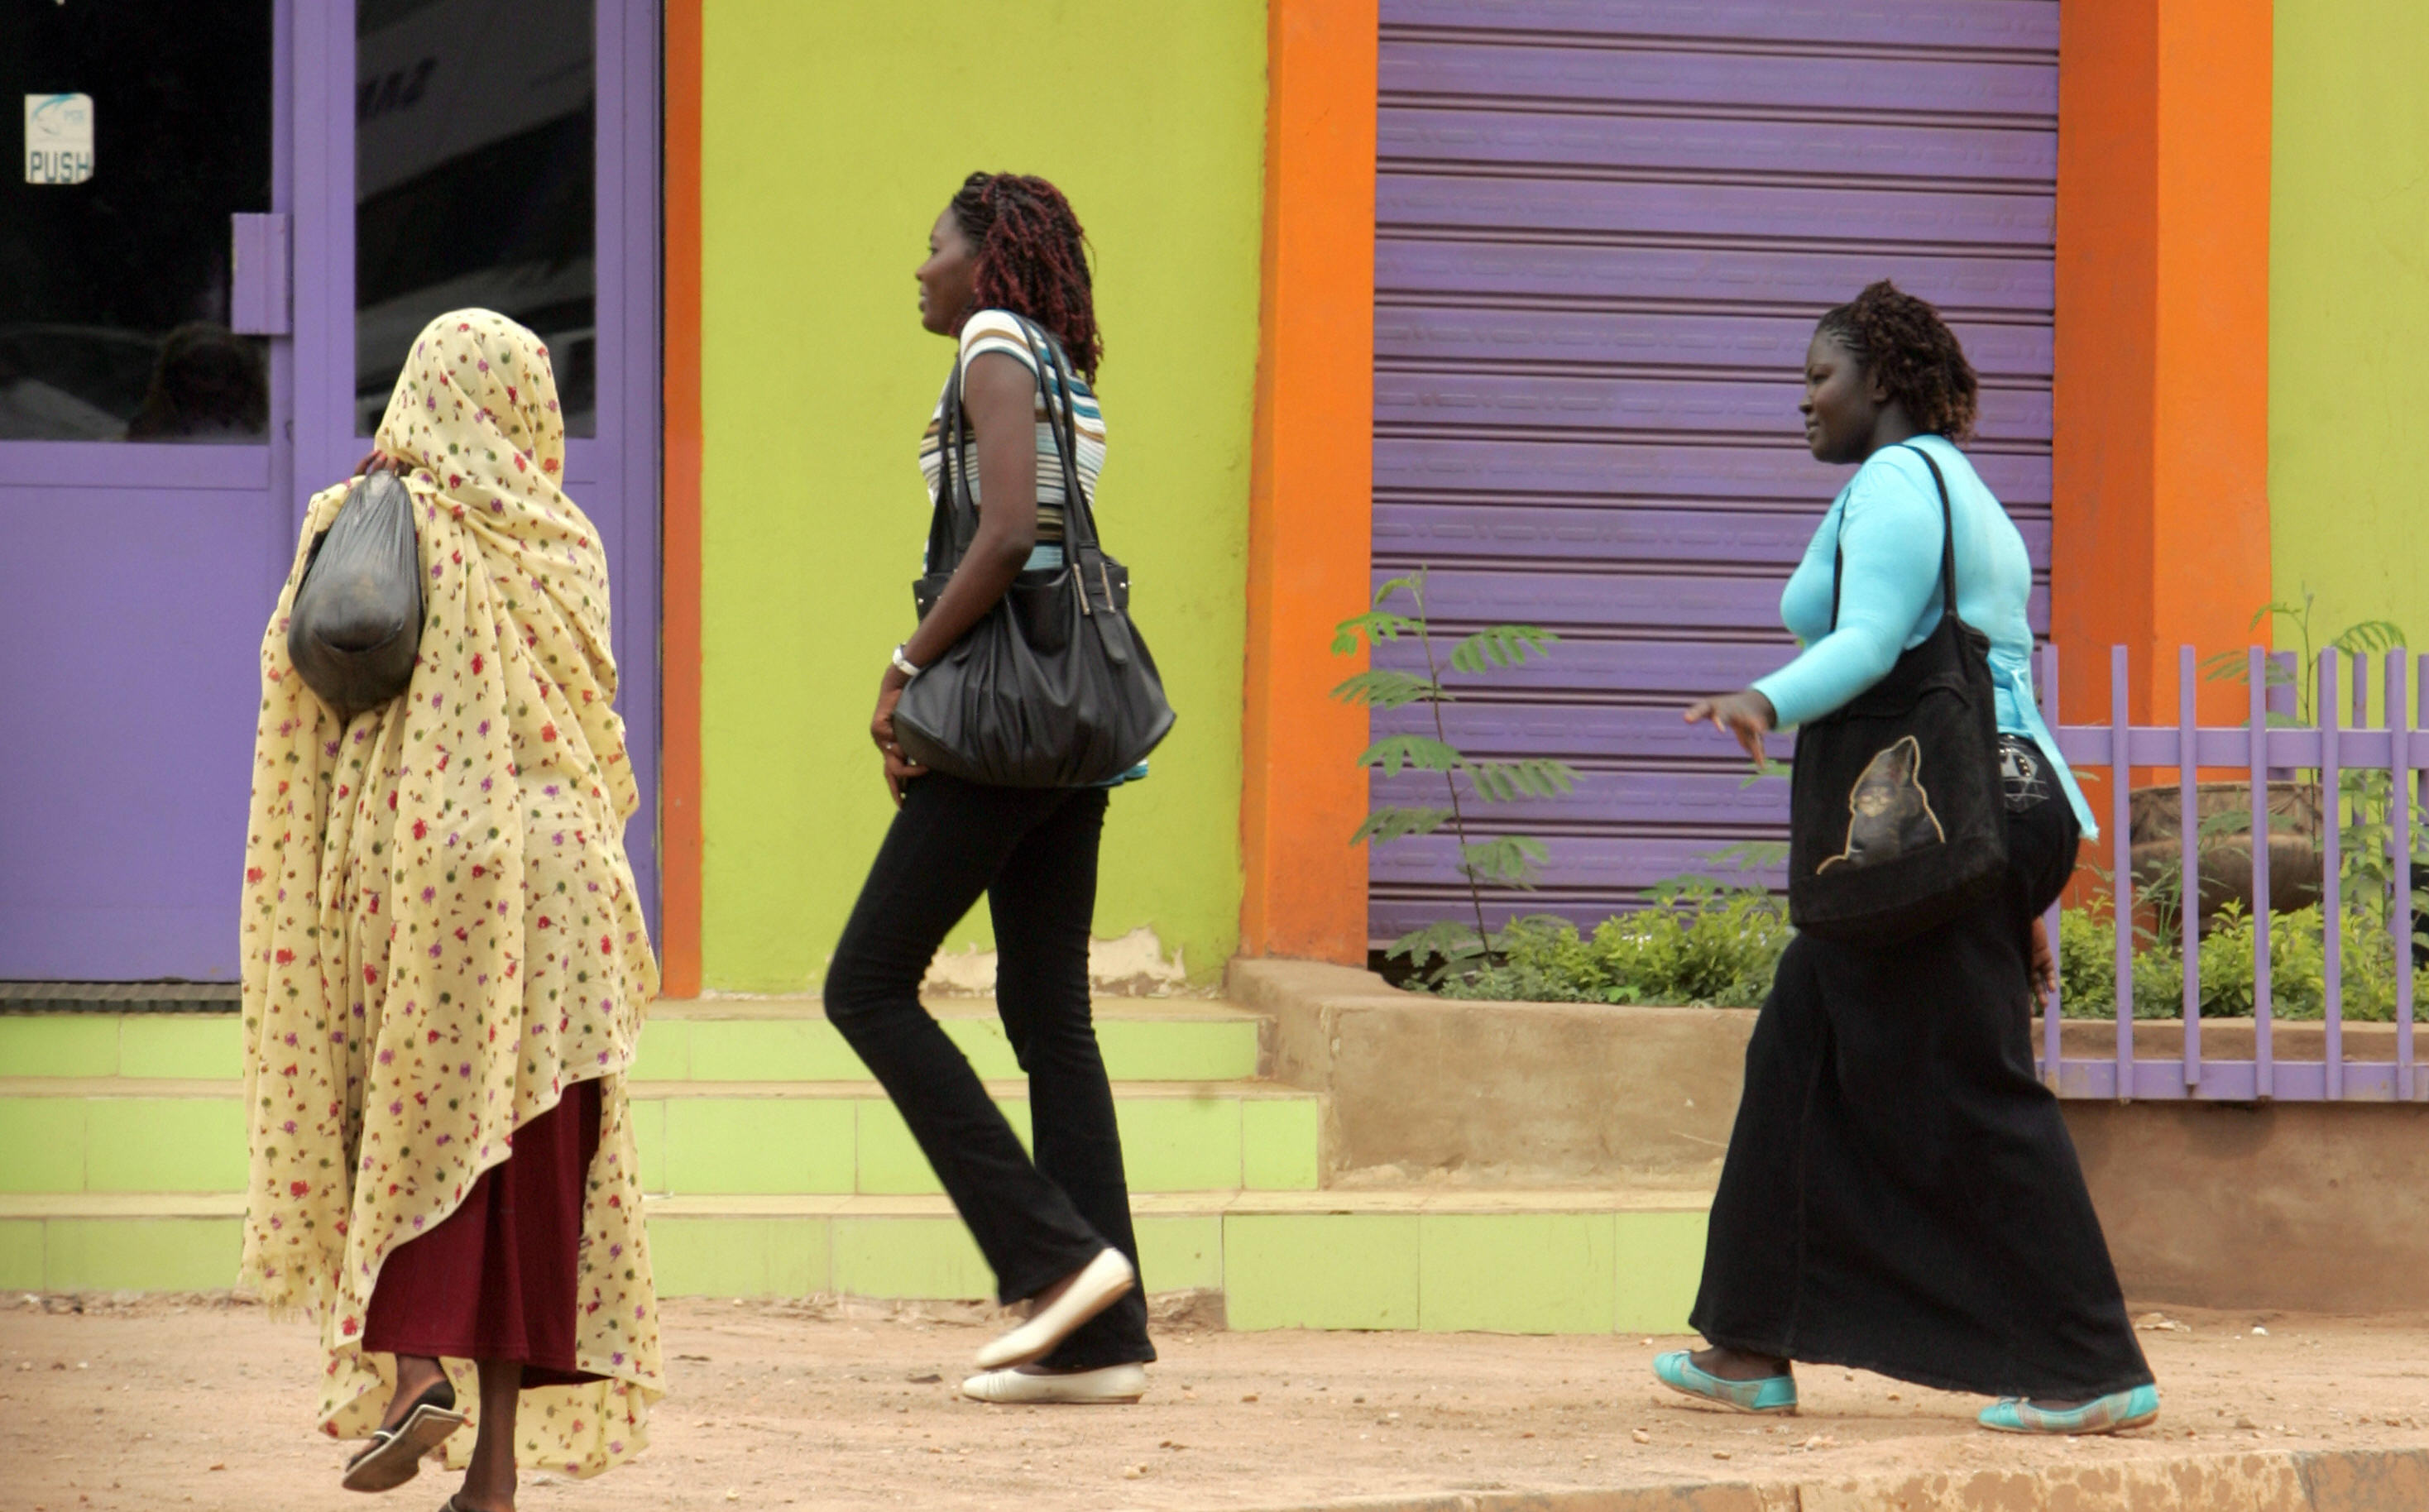 Three Sudanese women, one of them wearing trousers, walk on a main street in central Khartoum on September 8, 2009. The thousands of women who wear trousers every day all run the risk of a flogging if police decide their clothes are provocative. ASHRAF SHAZLY/AFP/Getty Images